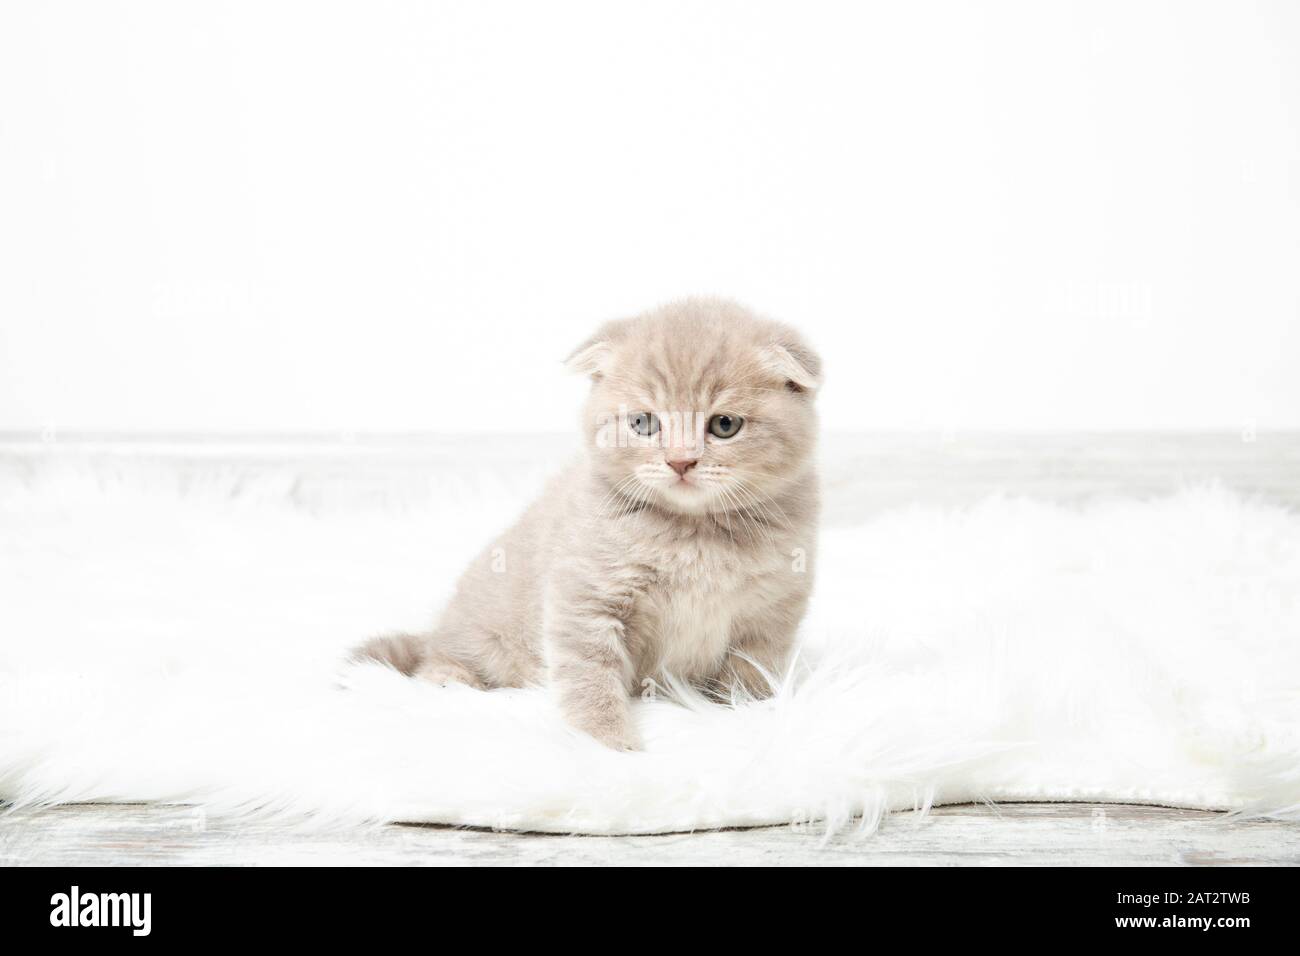 A little red kitten sits in a room on a fluffy white carpet. The kitten looking at the camera. Beautiful kitten Stock Photo